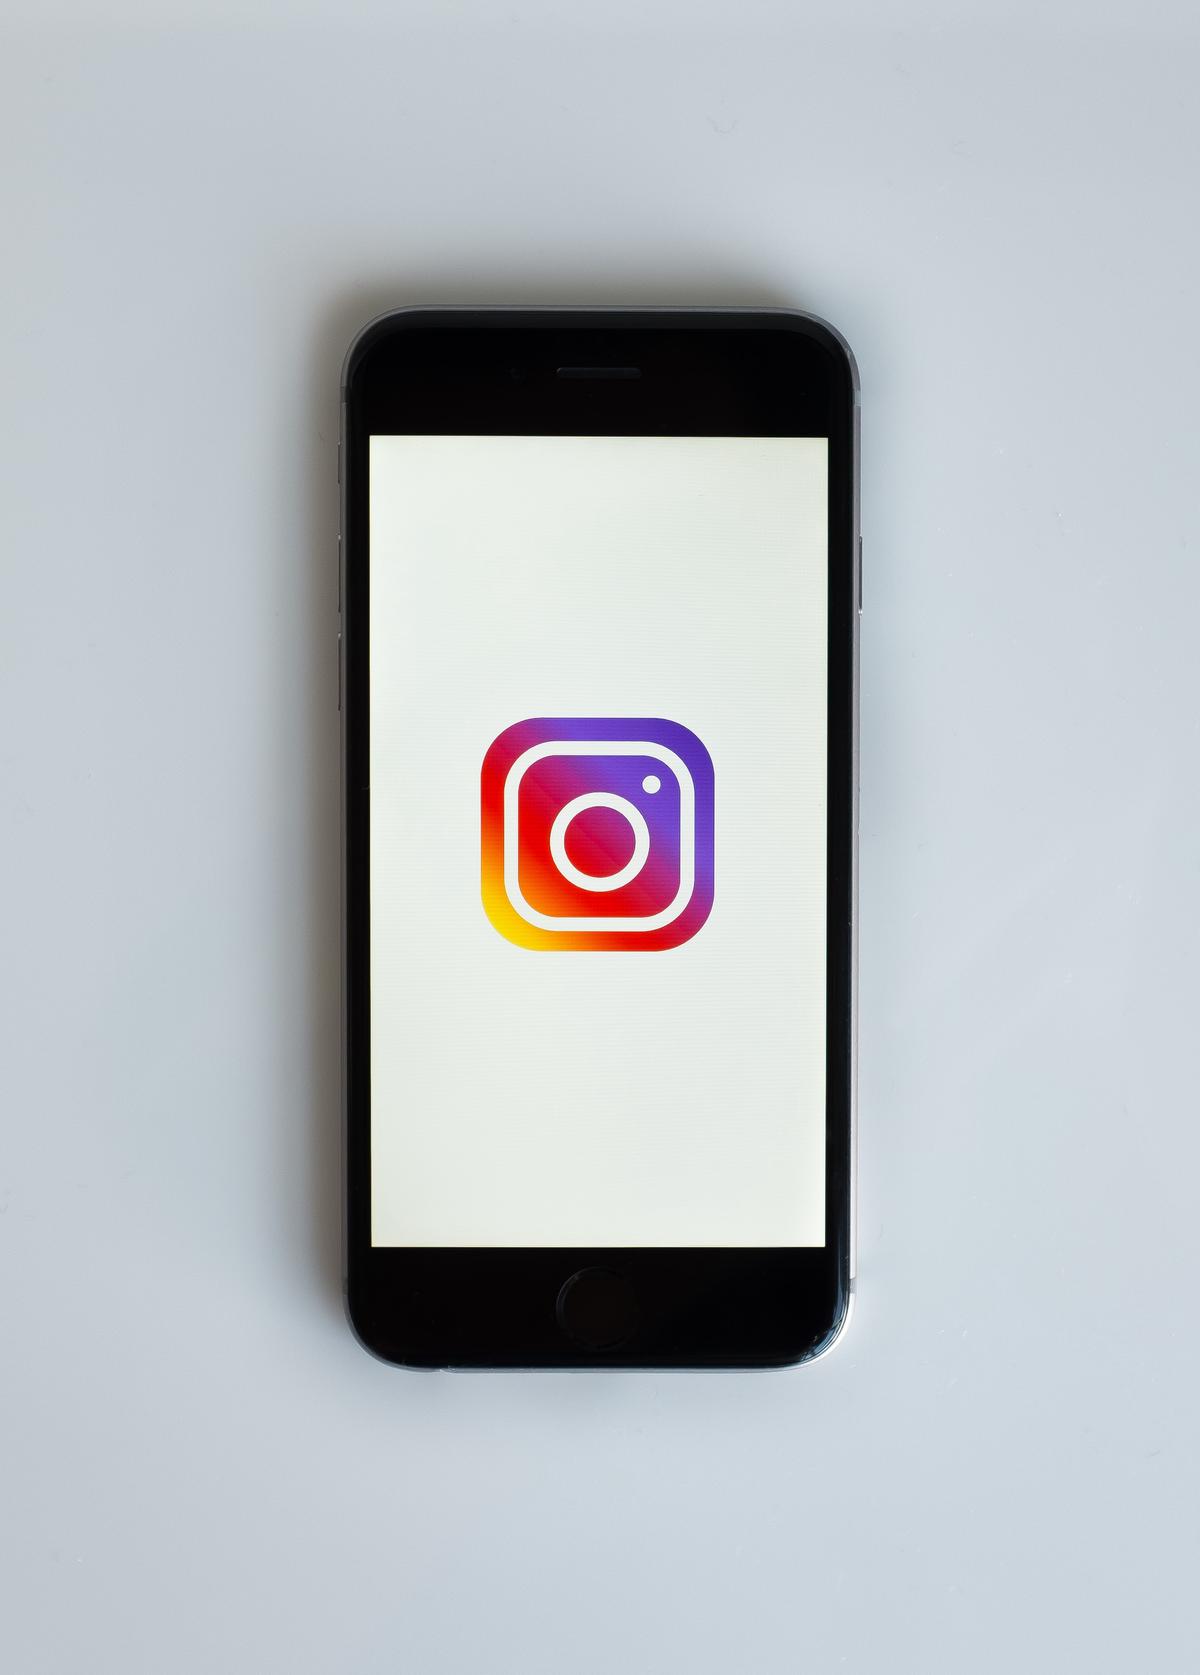 Image illustrating the recent update of Instagram, depicting hands holding a smartphone with the Instagram app on the screen.